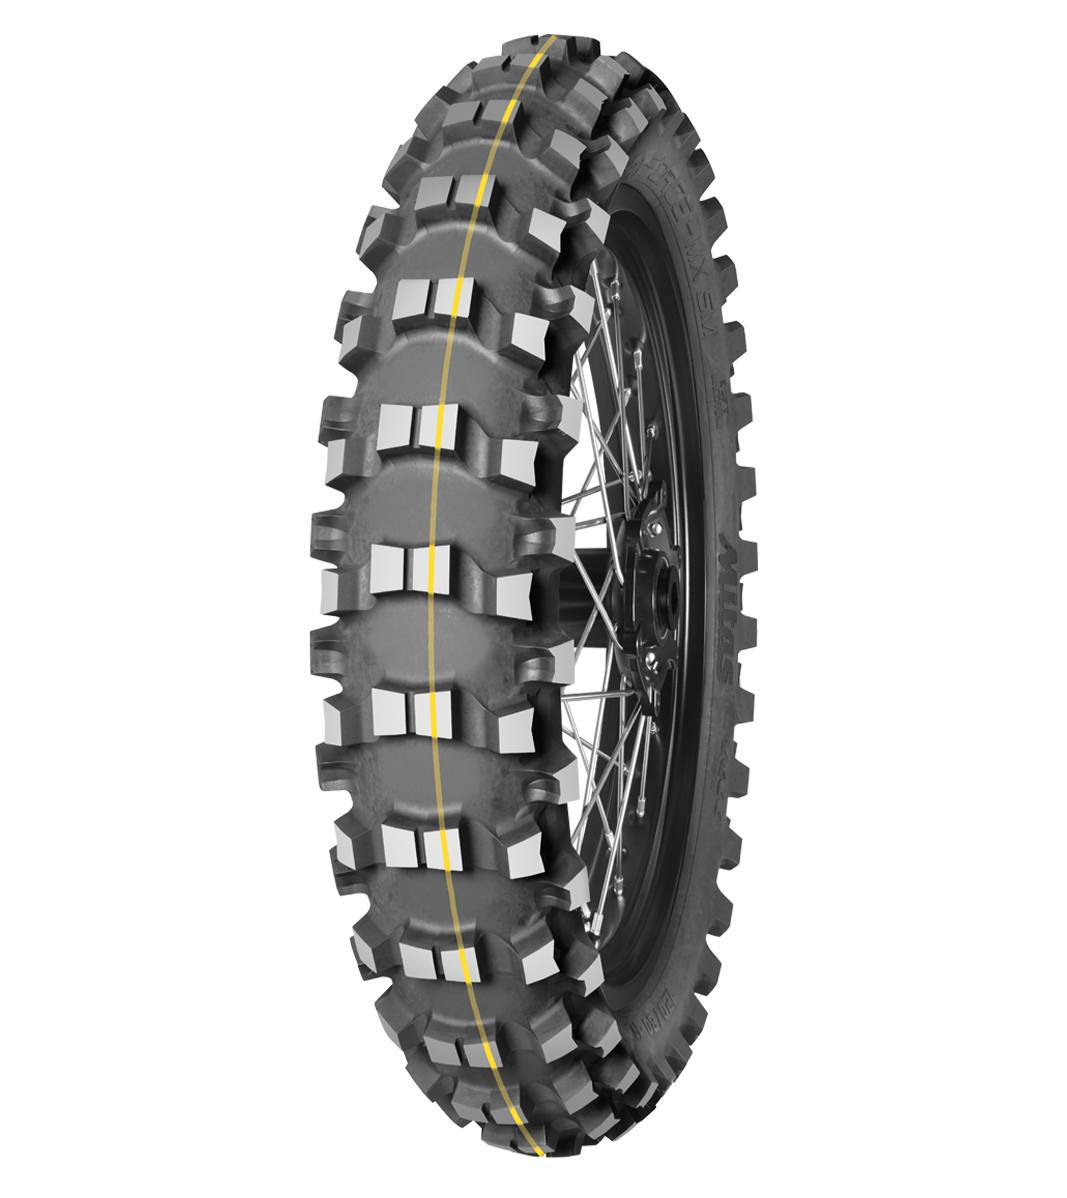 Mitas TERRA FORCE-MX SM 120/90-18 Enduro Competition Off-Road COUNTRY CROSS 65M Yellow Tube Rear Tire, 226550, 120/90-18, Enduro Competition, Off-Road, Rear, Terra Force, Terra Force-MX SM, Trail, Tires - Imported and distributed in North &amp; South America by Lindeco Genuine Powersports - Premier Powersports Equipment and Accessories for Motorcycle Enthusiasts, Professional Riders and Dealers.